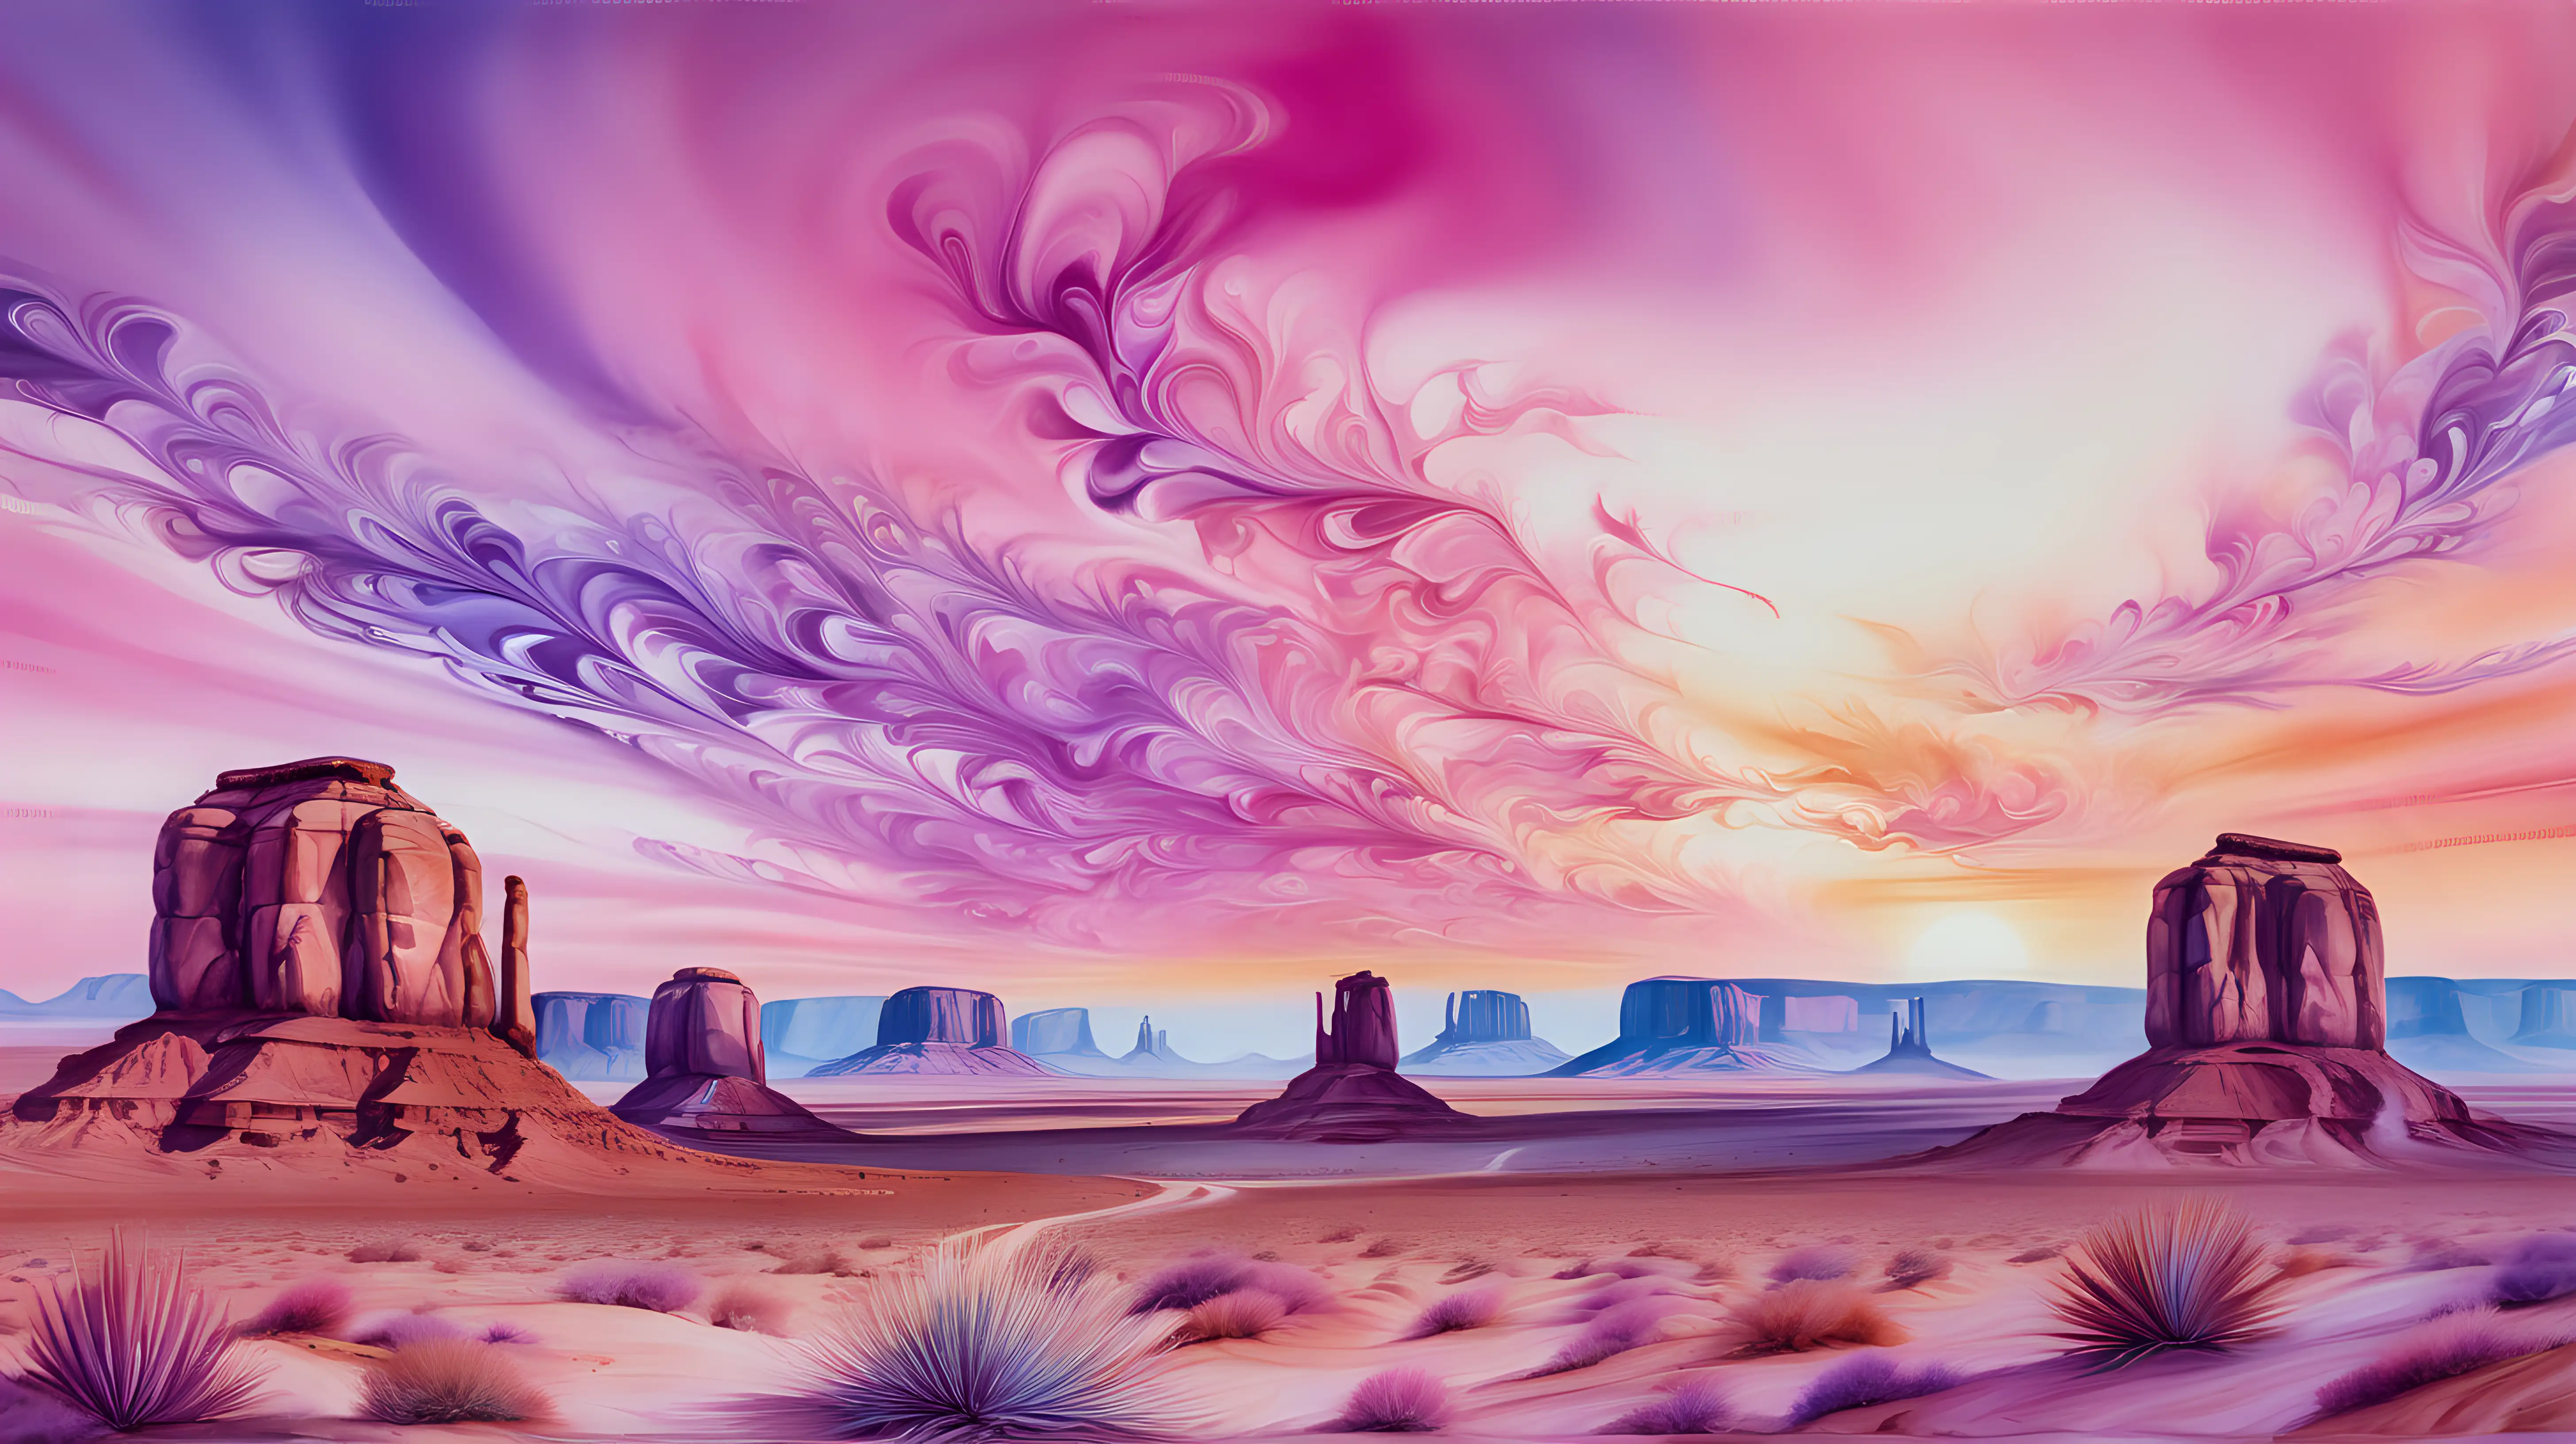 A desert sunset painting the landscape in hues of pink and purple, while mirage-like distortions create an illusion of watercolor brushstrokes dancing across the sky, evoking a psychedelic masterpiece.